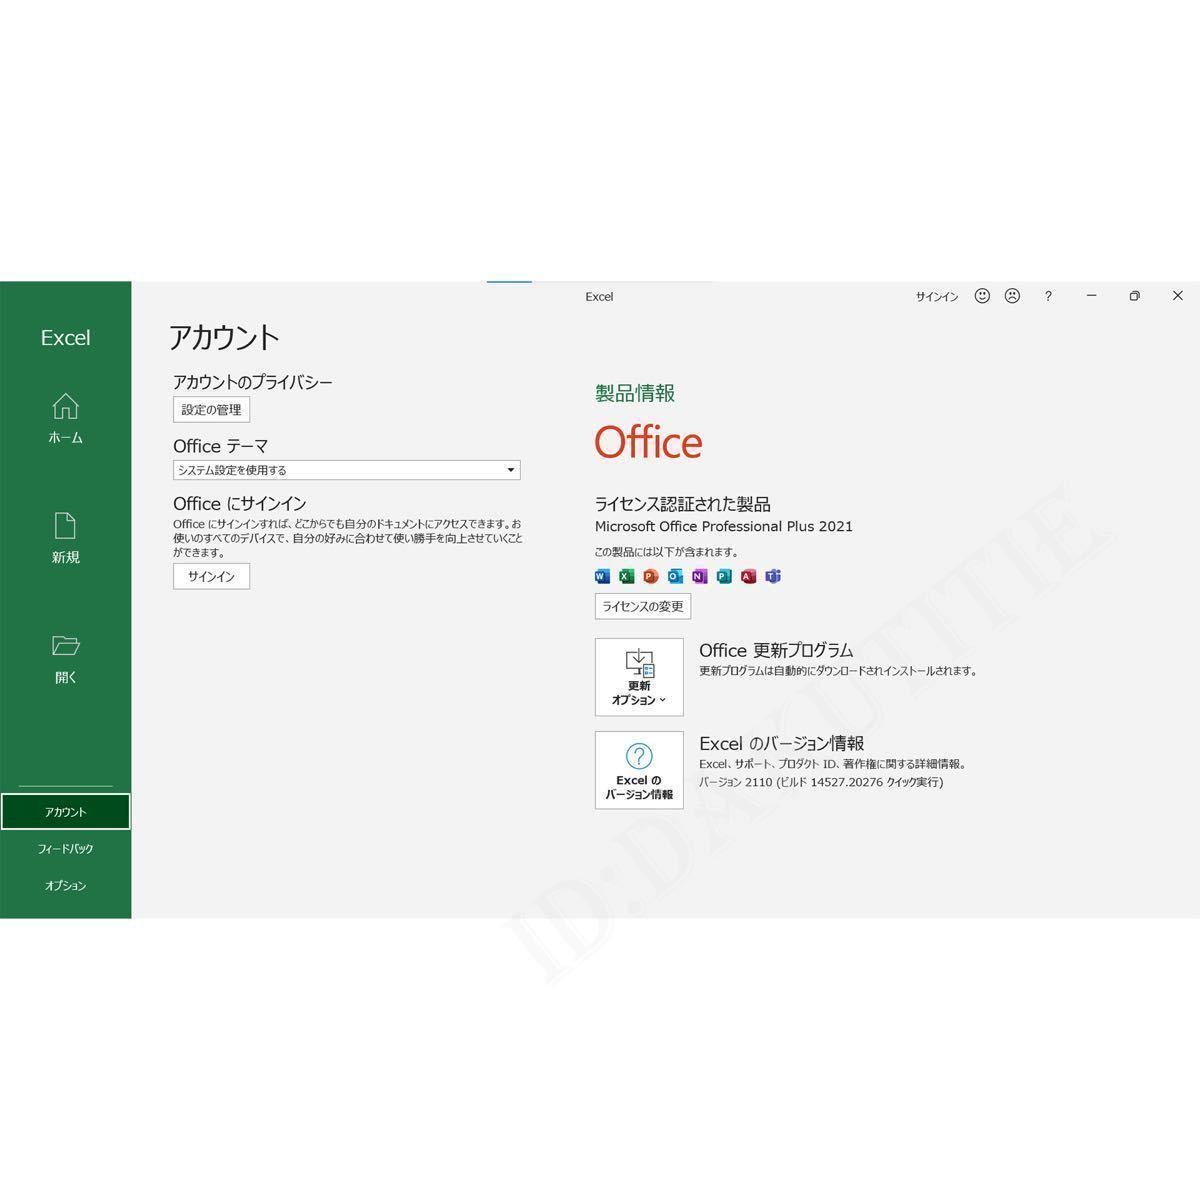 [Office2021. year regular guarantee ]Microsoft Office 2021 Professional Plus office 2021 Pro duct key Access Word Excel PowerPoin Japanese 